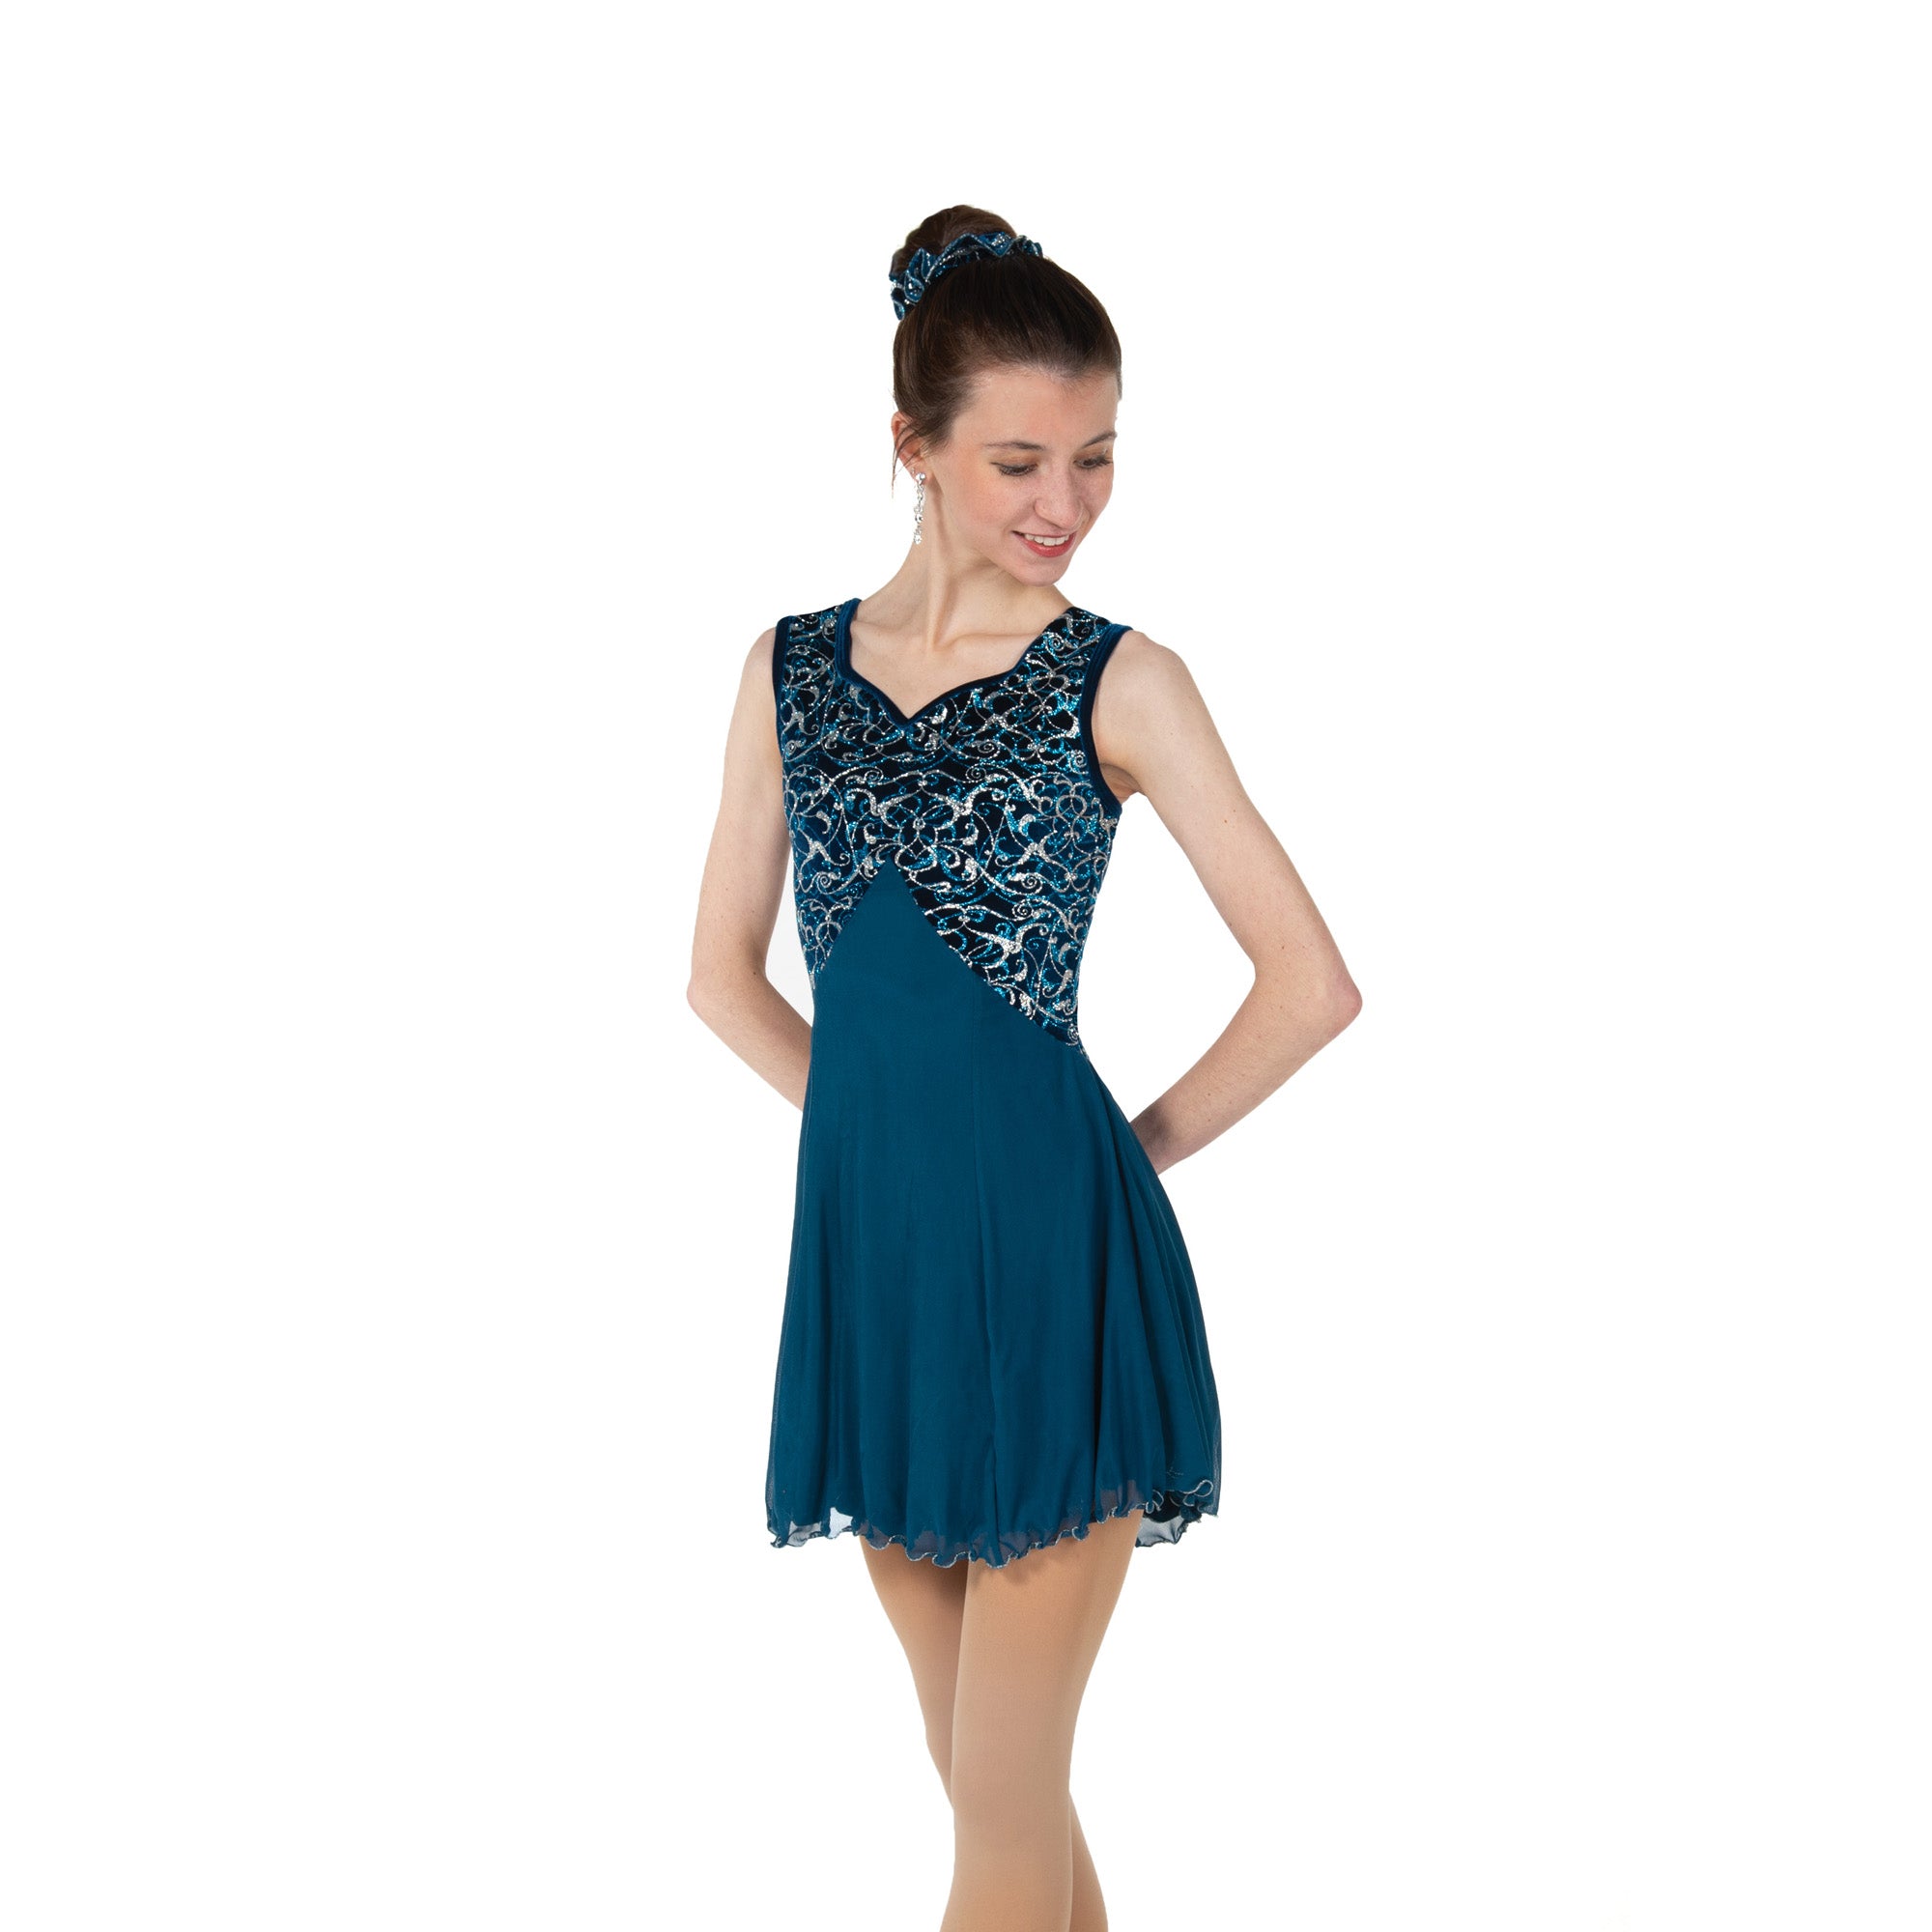 50 Twist of Teal Skating Dress by Jerry's